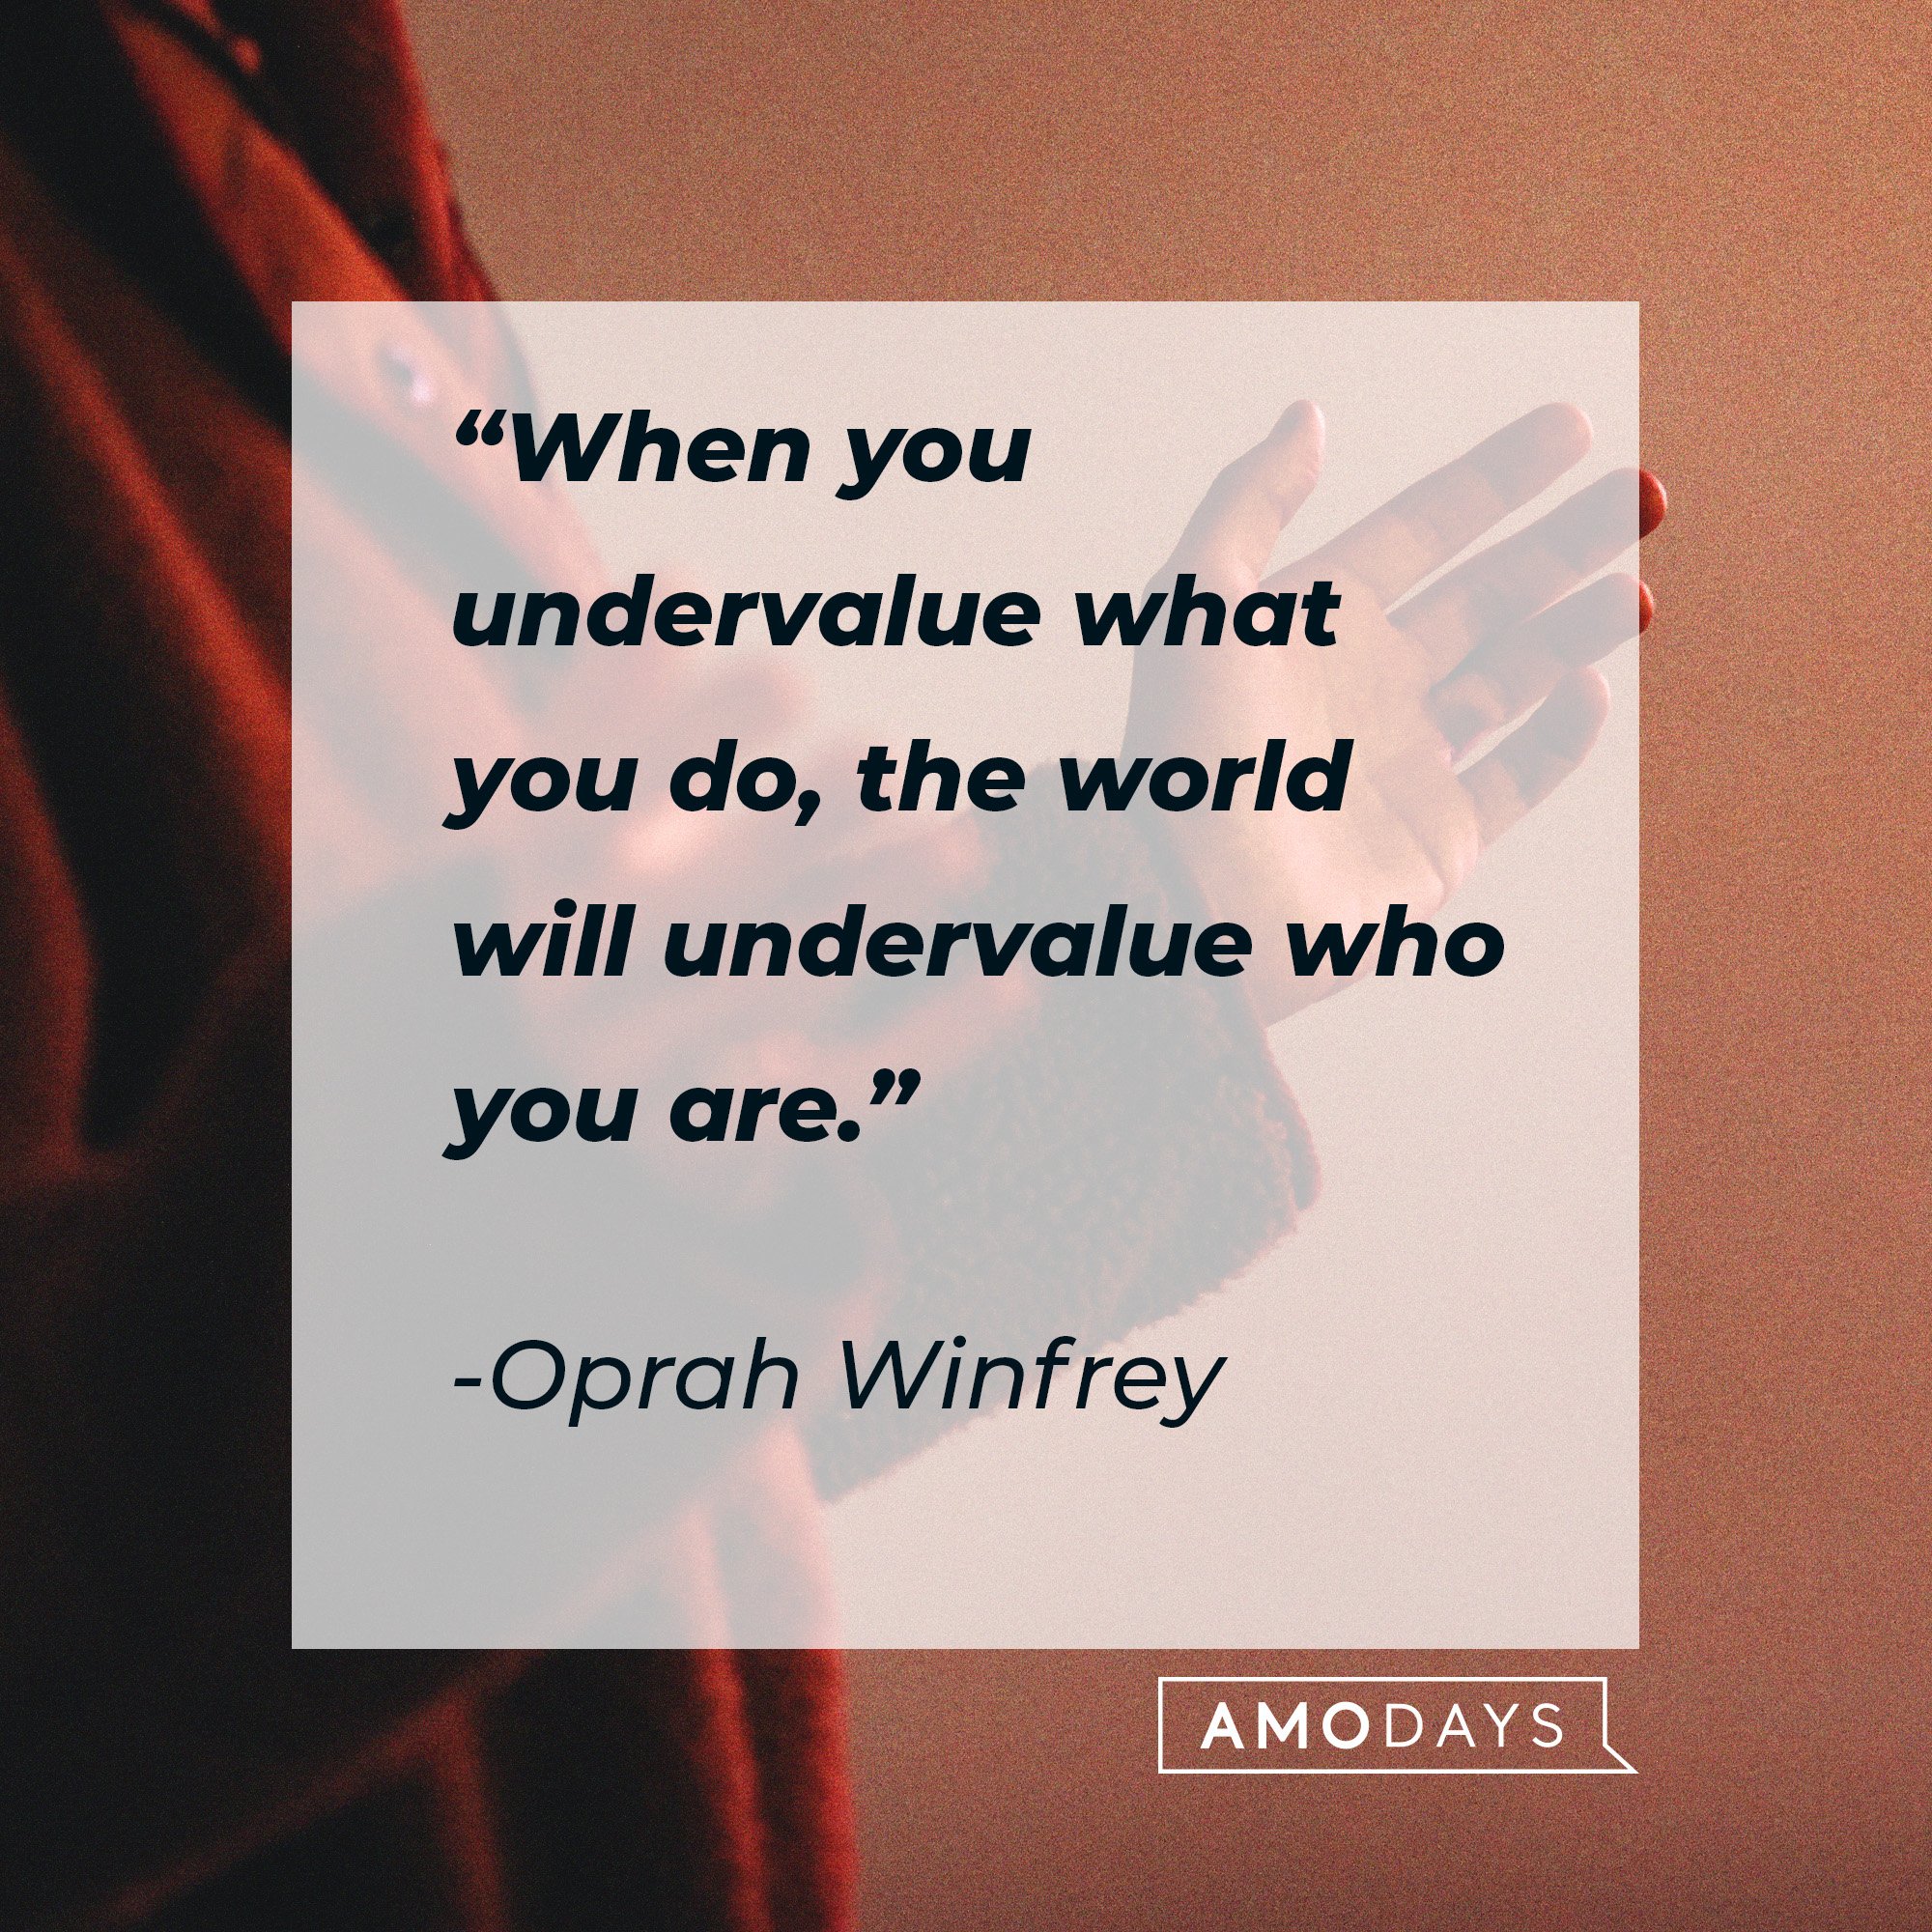 Oprah Winfrey's quote: “When you undervalue what you do, the world will undervalue who you are.” | Image: AmoDays